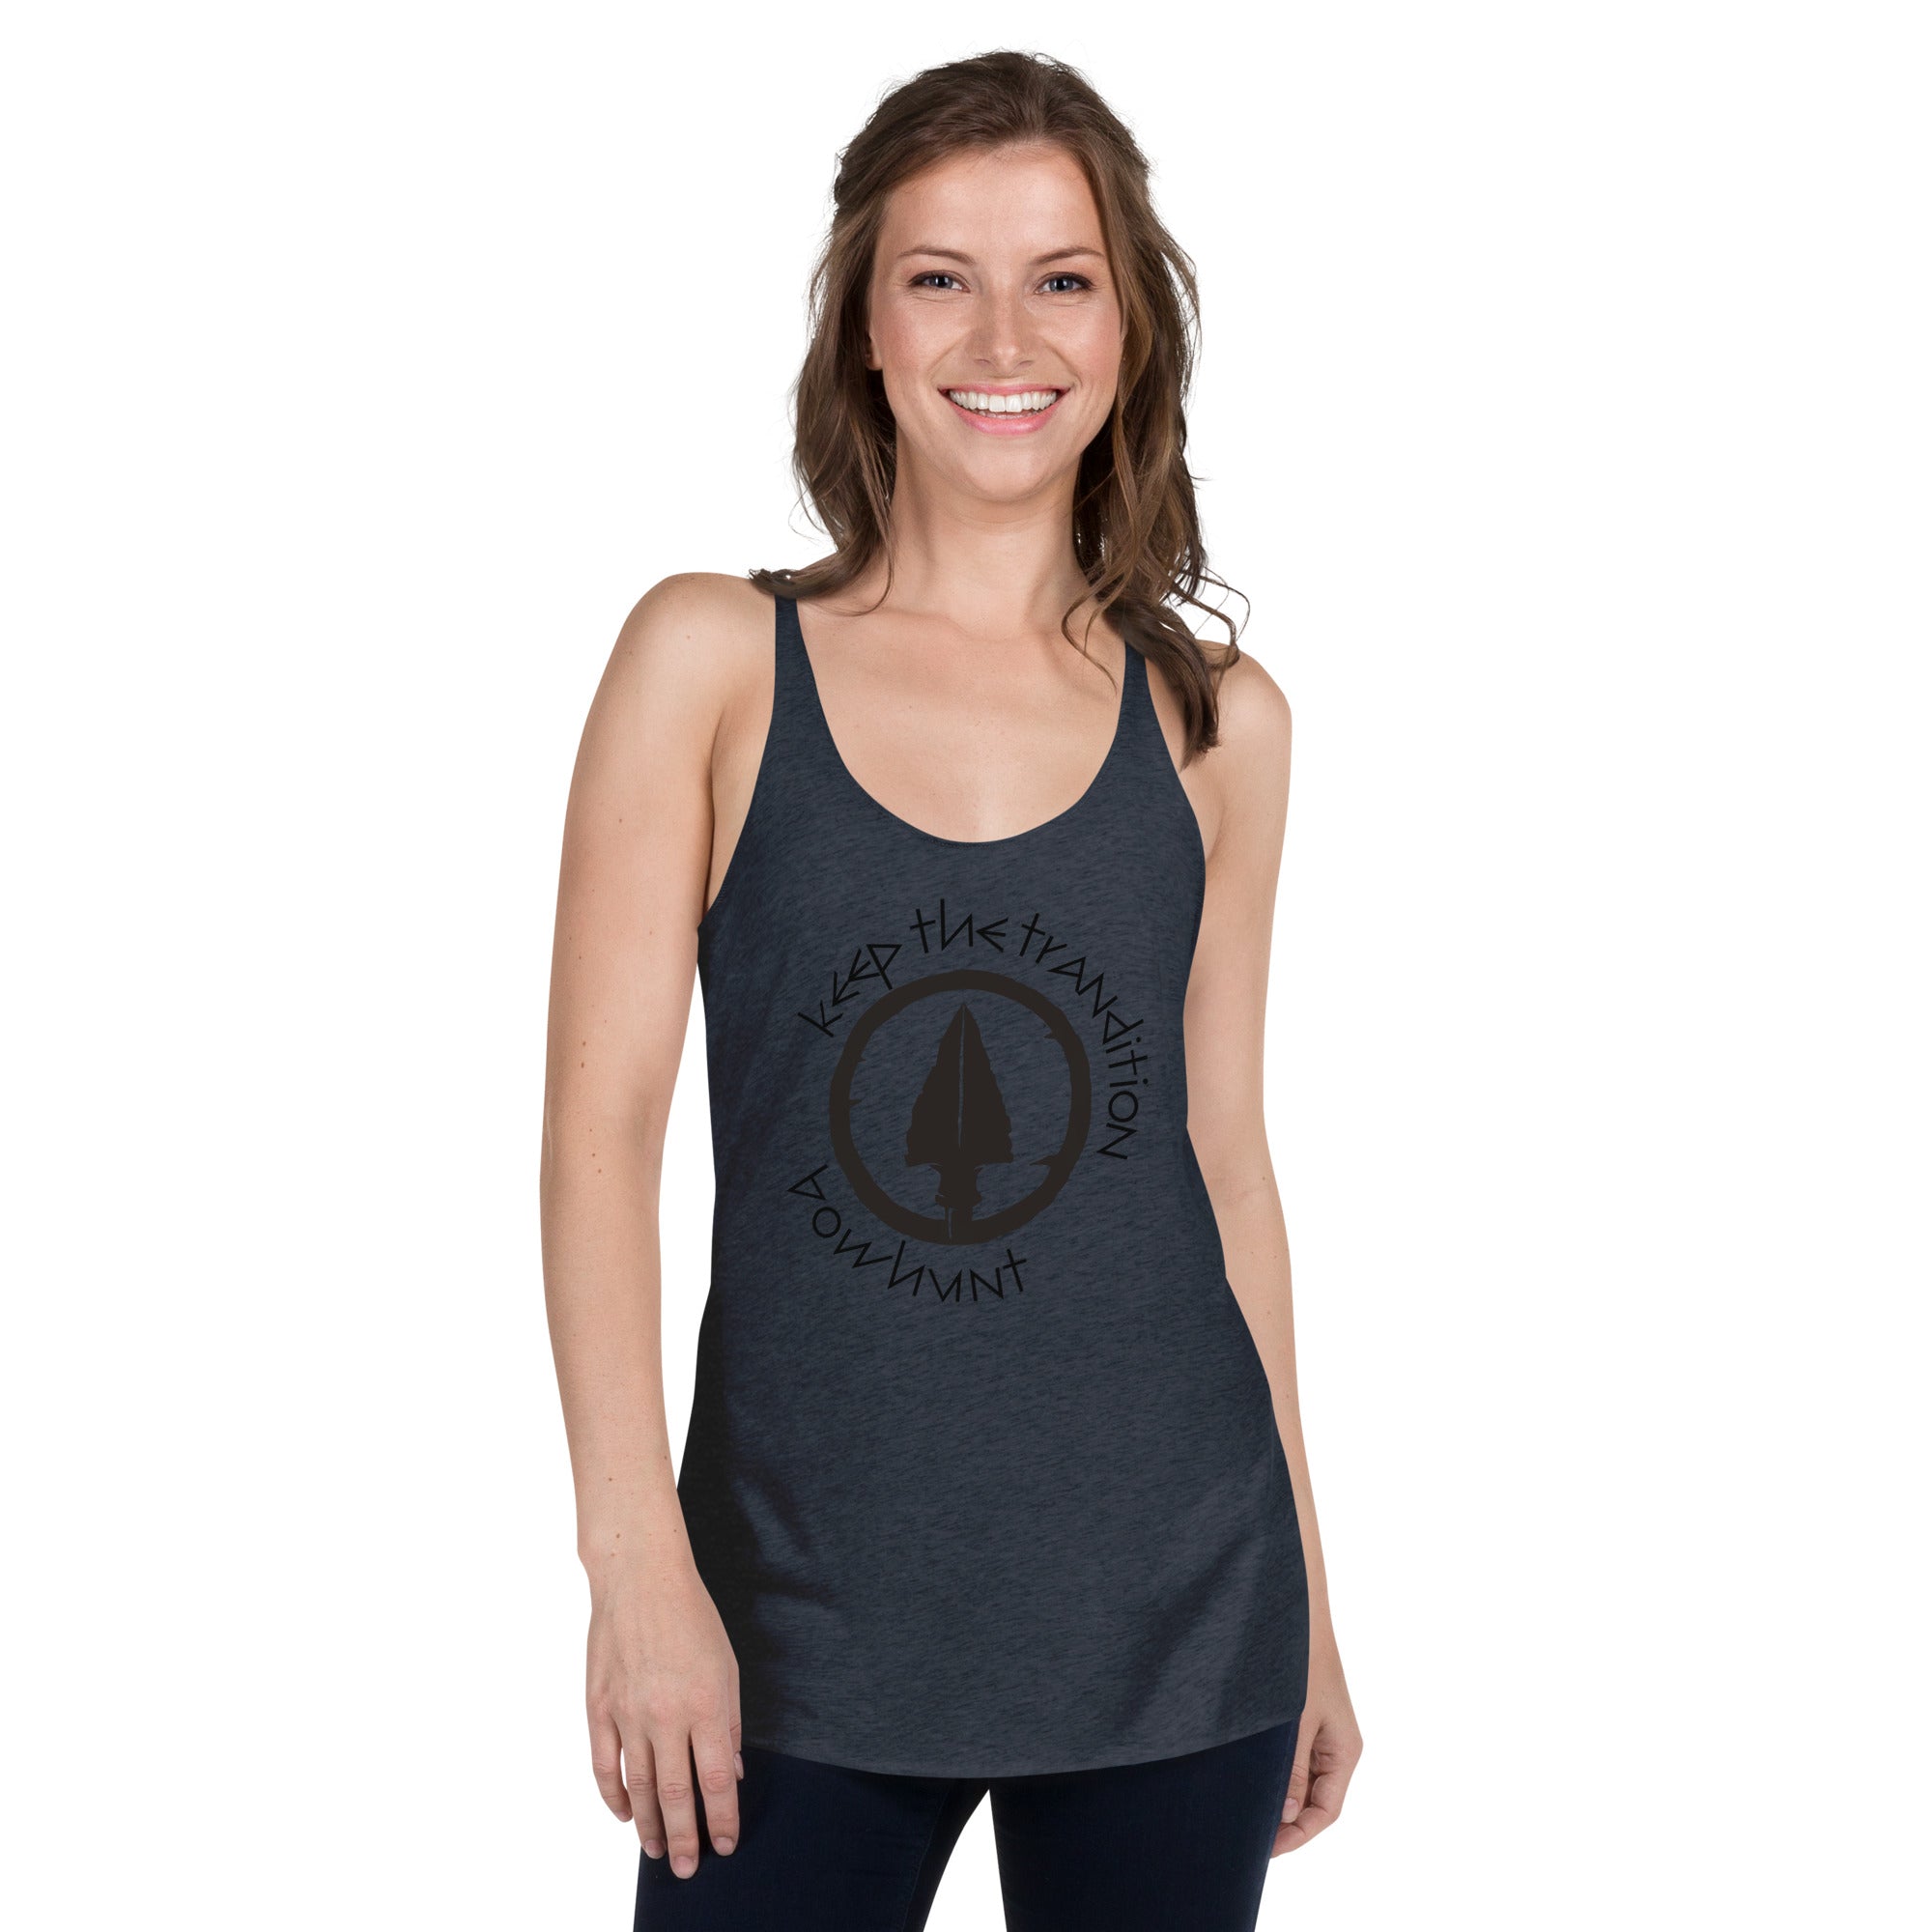 Keep The Tradition Women's Racerback Tank - Bow Hunt